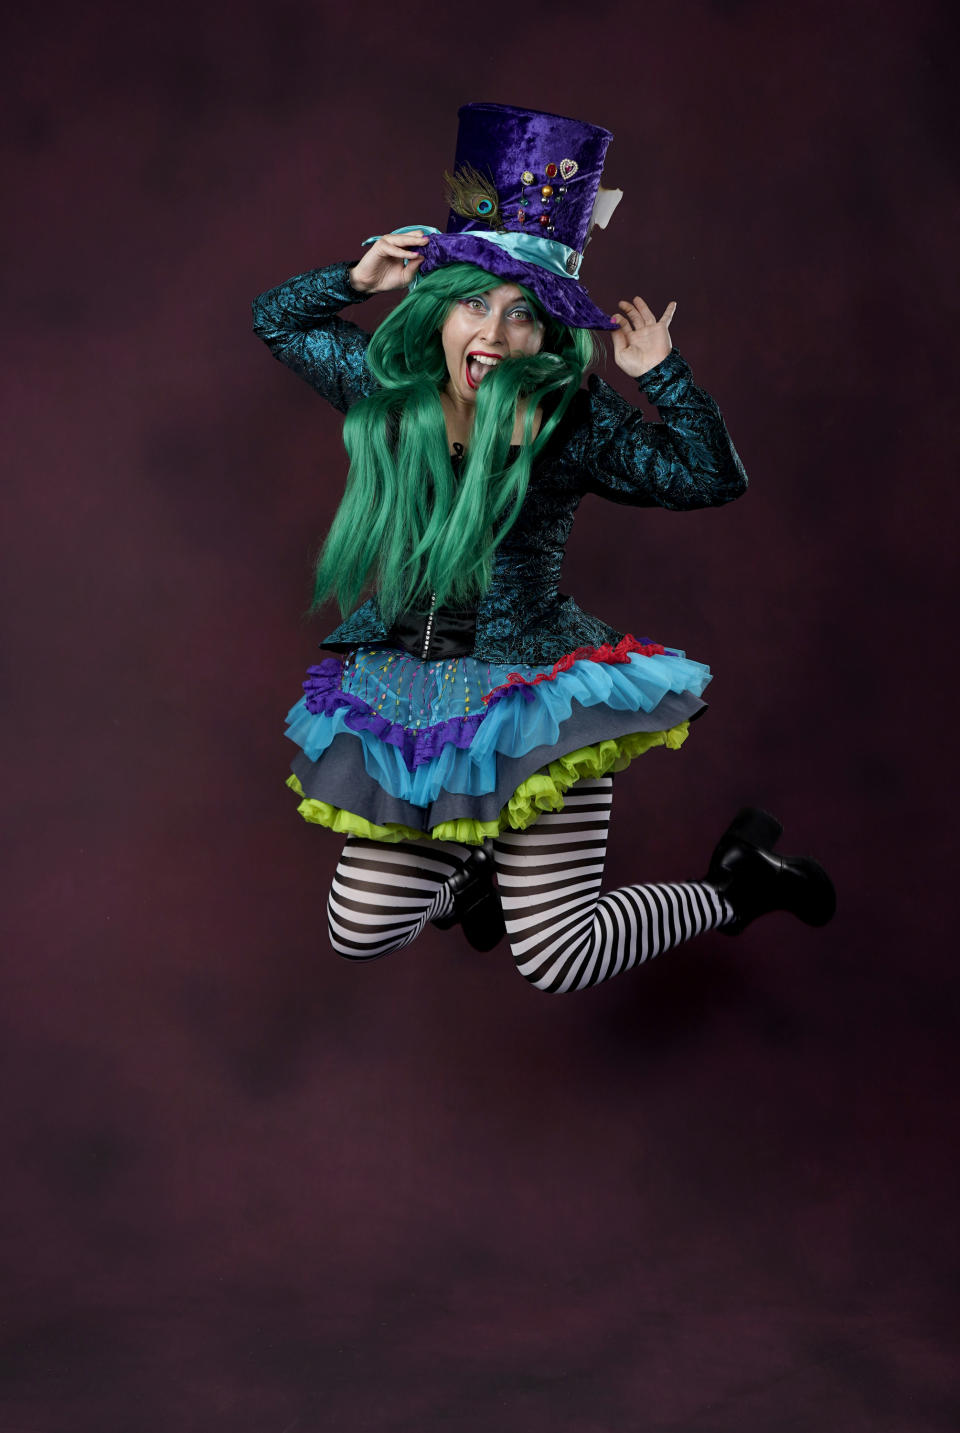 Kaleigh Kailani, from Los Angeles, poses for a portrait dressed as the Mad Hatter on day one of Comic-Con International on Thursday, July 21, 2022, in San Diego. (AP Photo/Chris Pizzello)